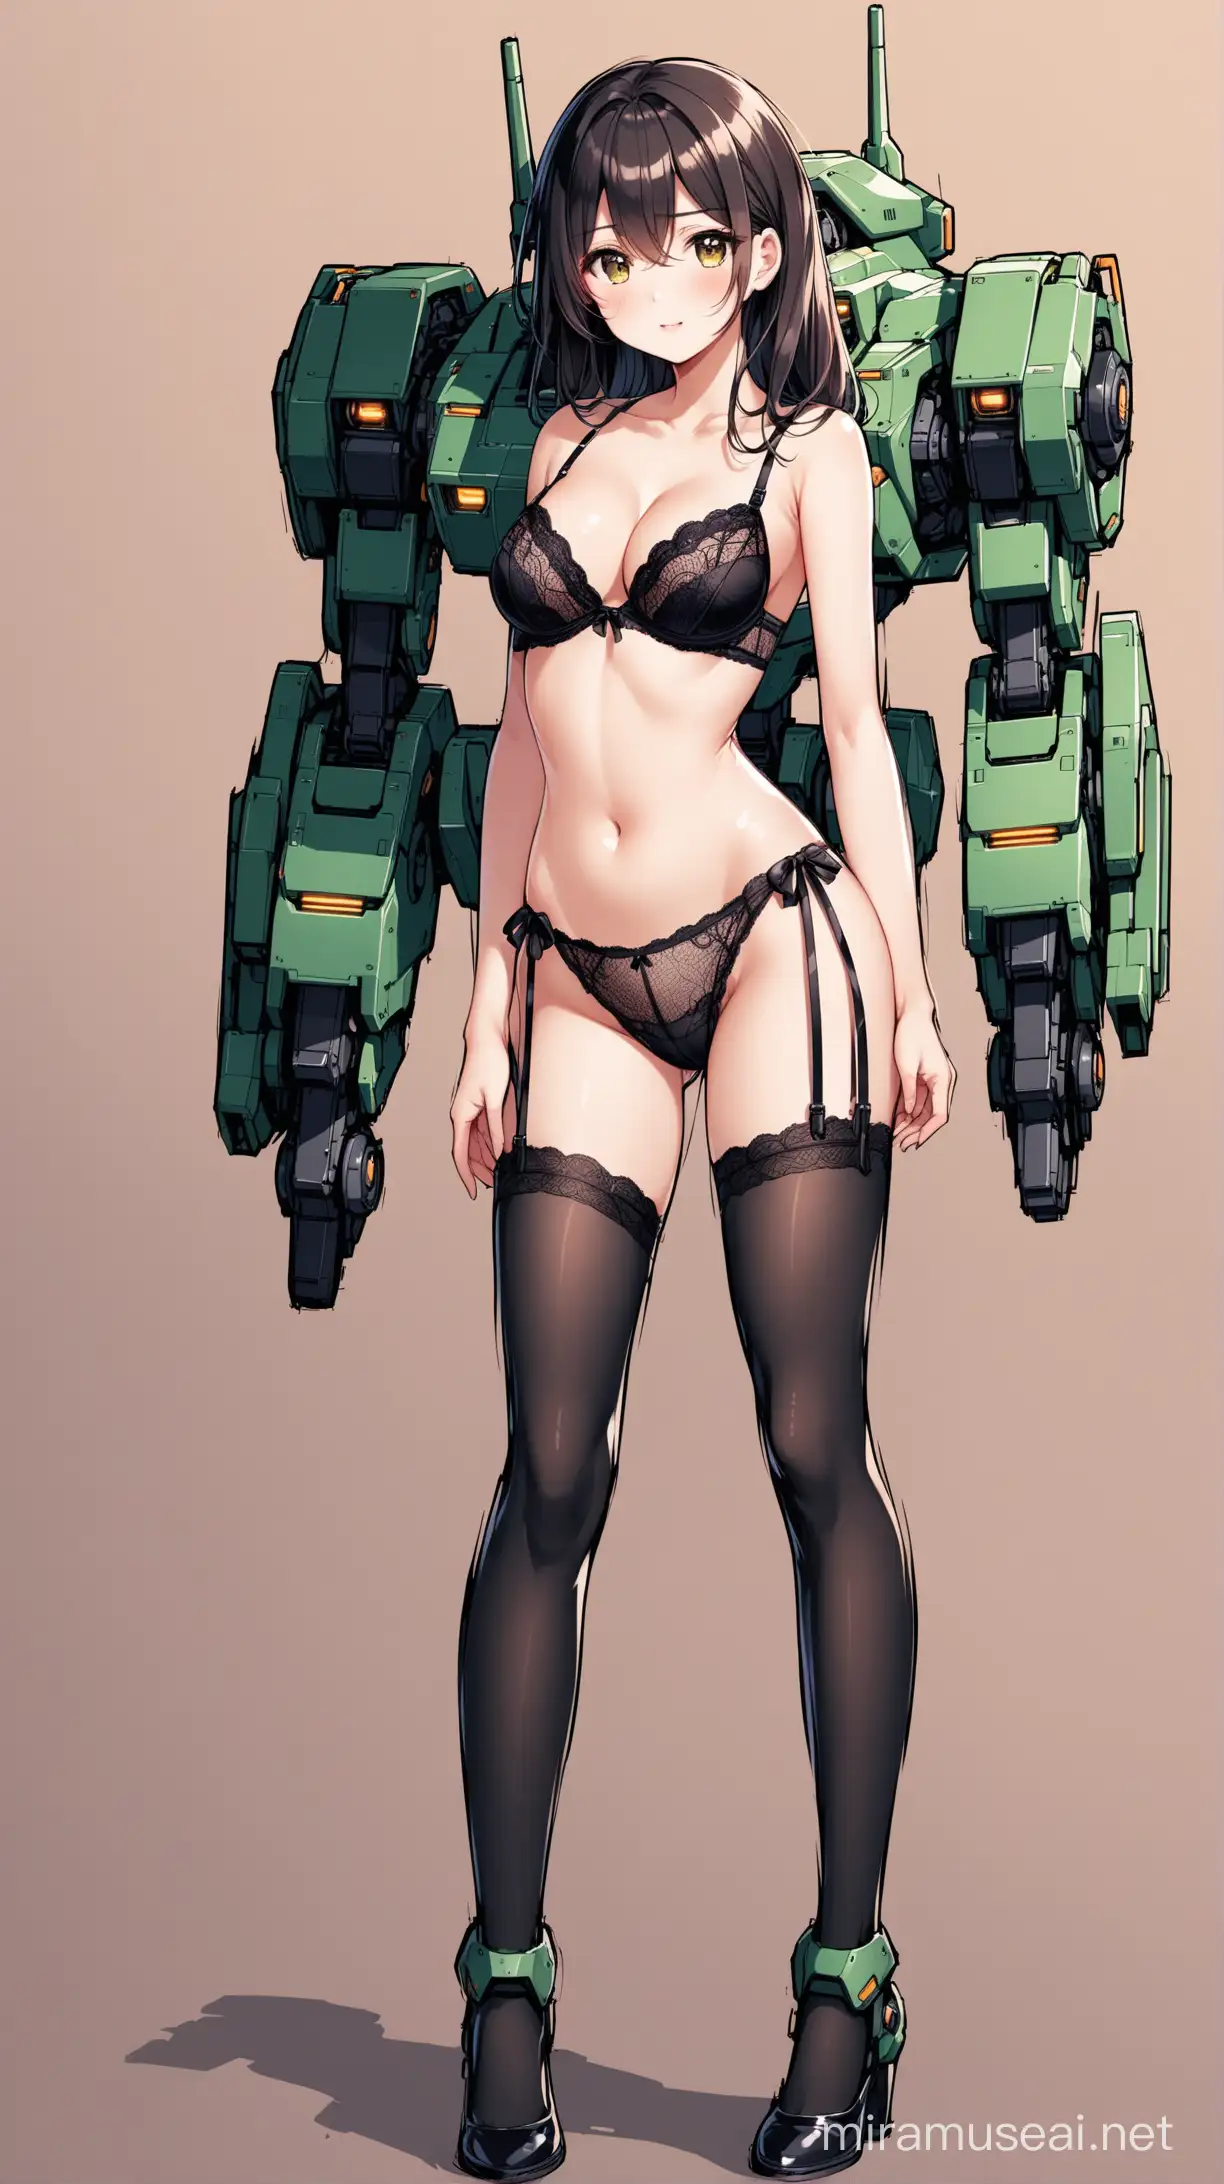 Cybernetic Femme Fatale in Lingerie and Stockings